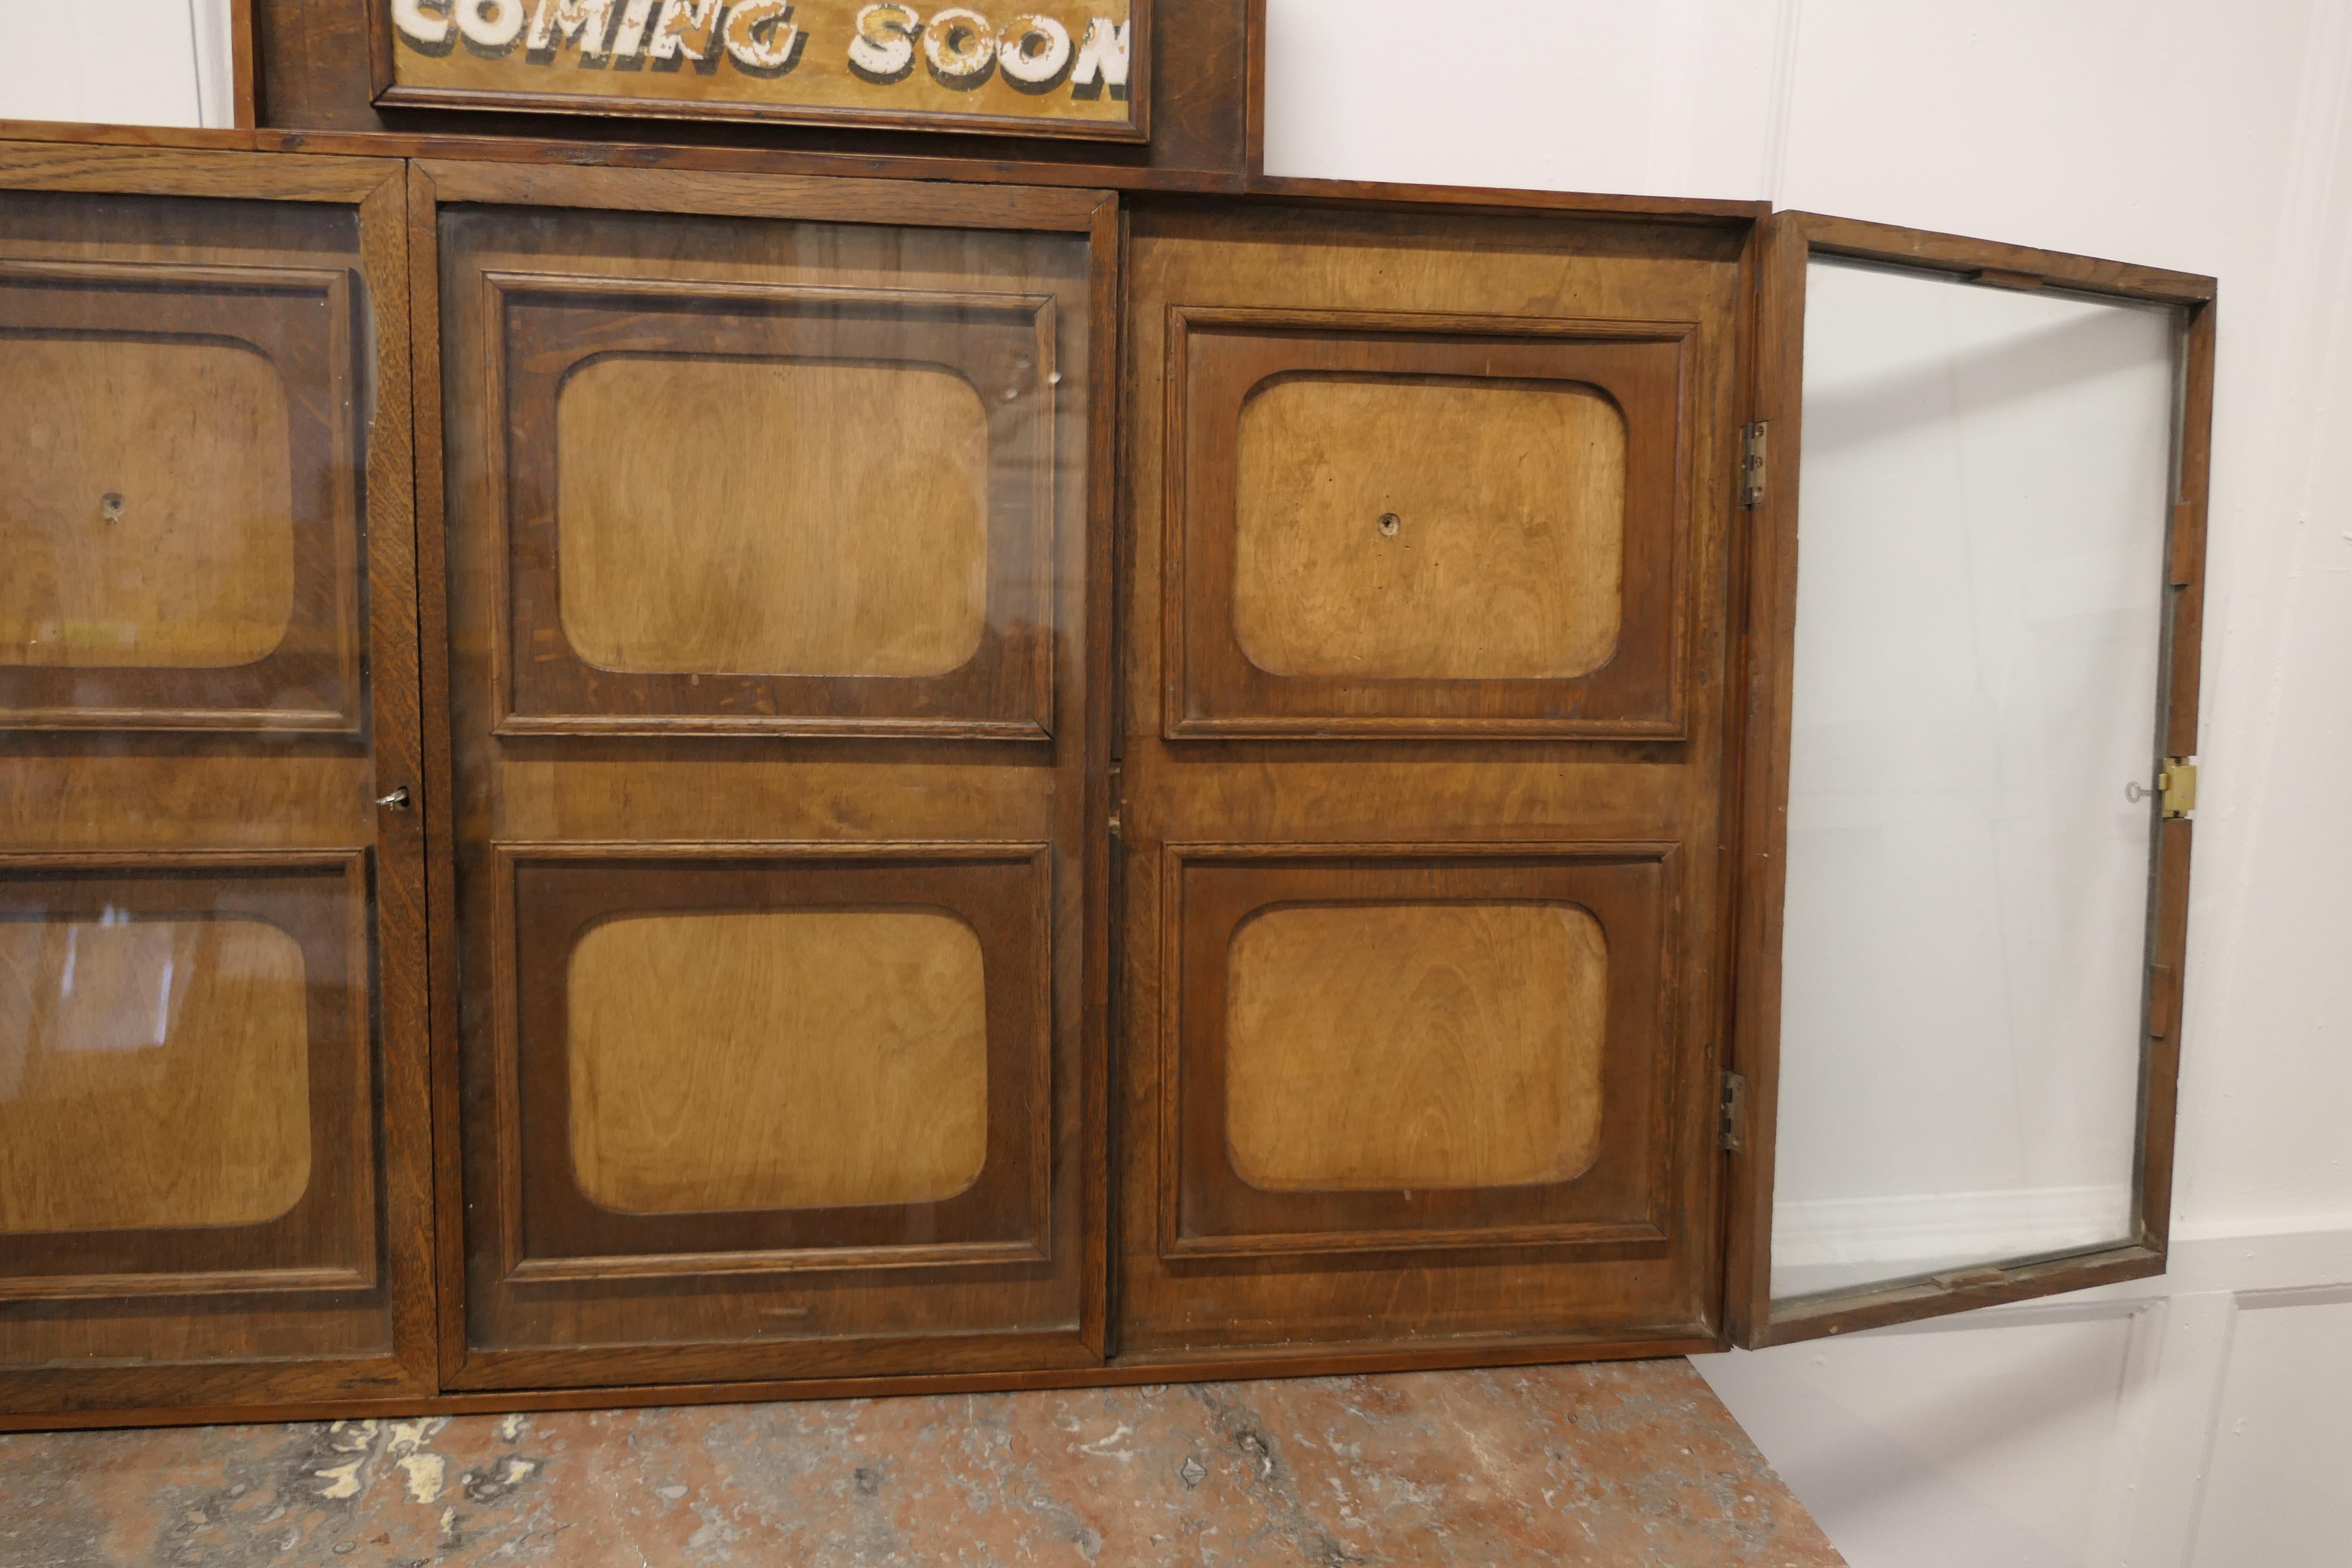 Art Deco cinema notice board, Odeon Advertising.

This is a shallow wall hanging cupboard, dating back to the early 20th Century, it is made in oak and designed to display 6 Film Posters
The Cabinet has 3 lockable doors, 2 hinged and the centre